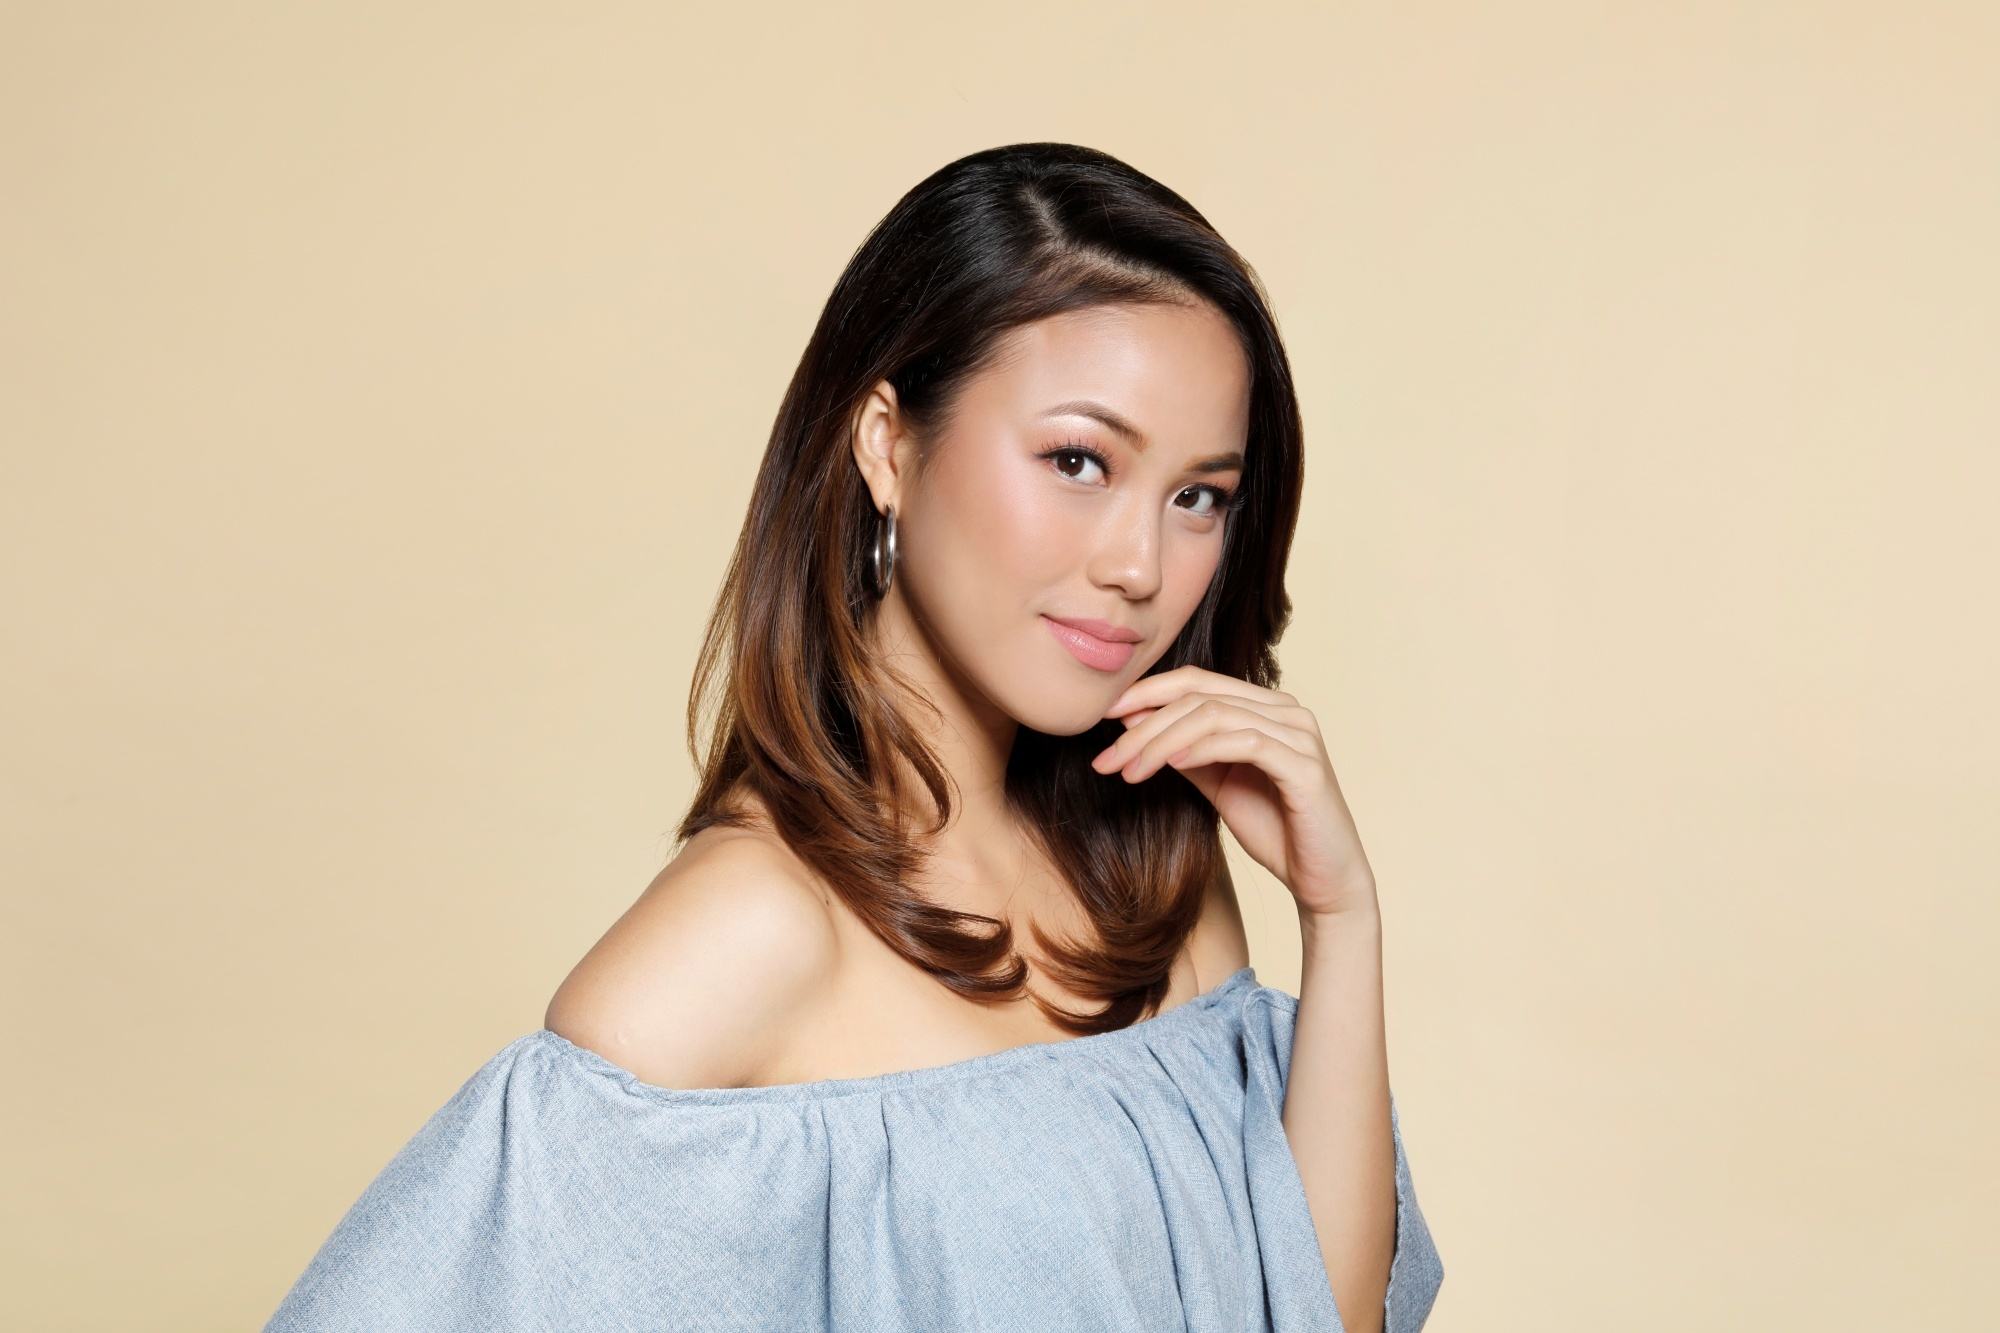 Asian woman with long layered hair wearing an off-shoulder-top